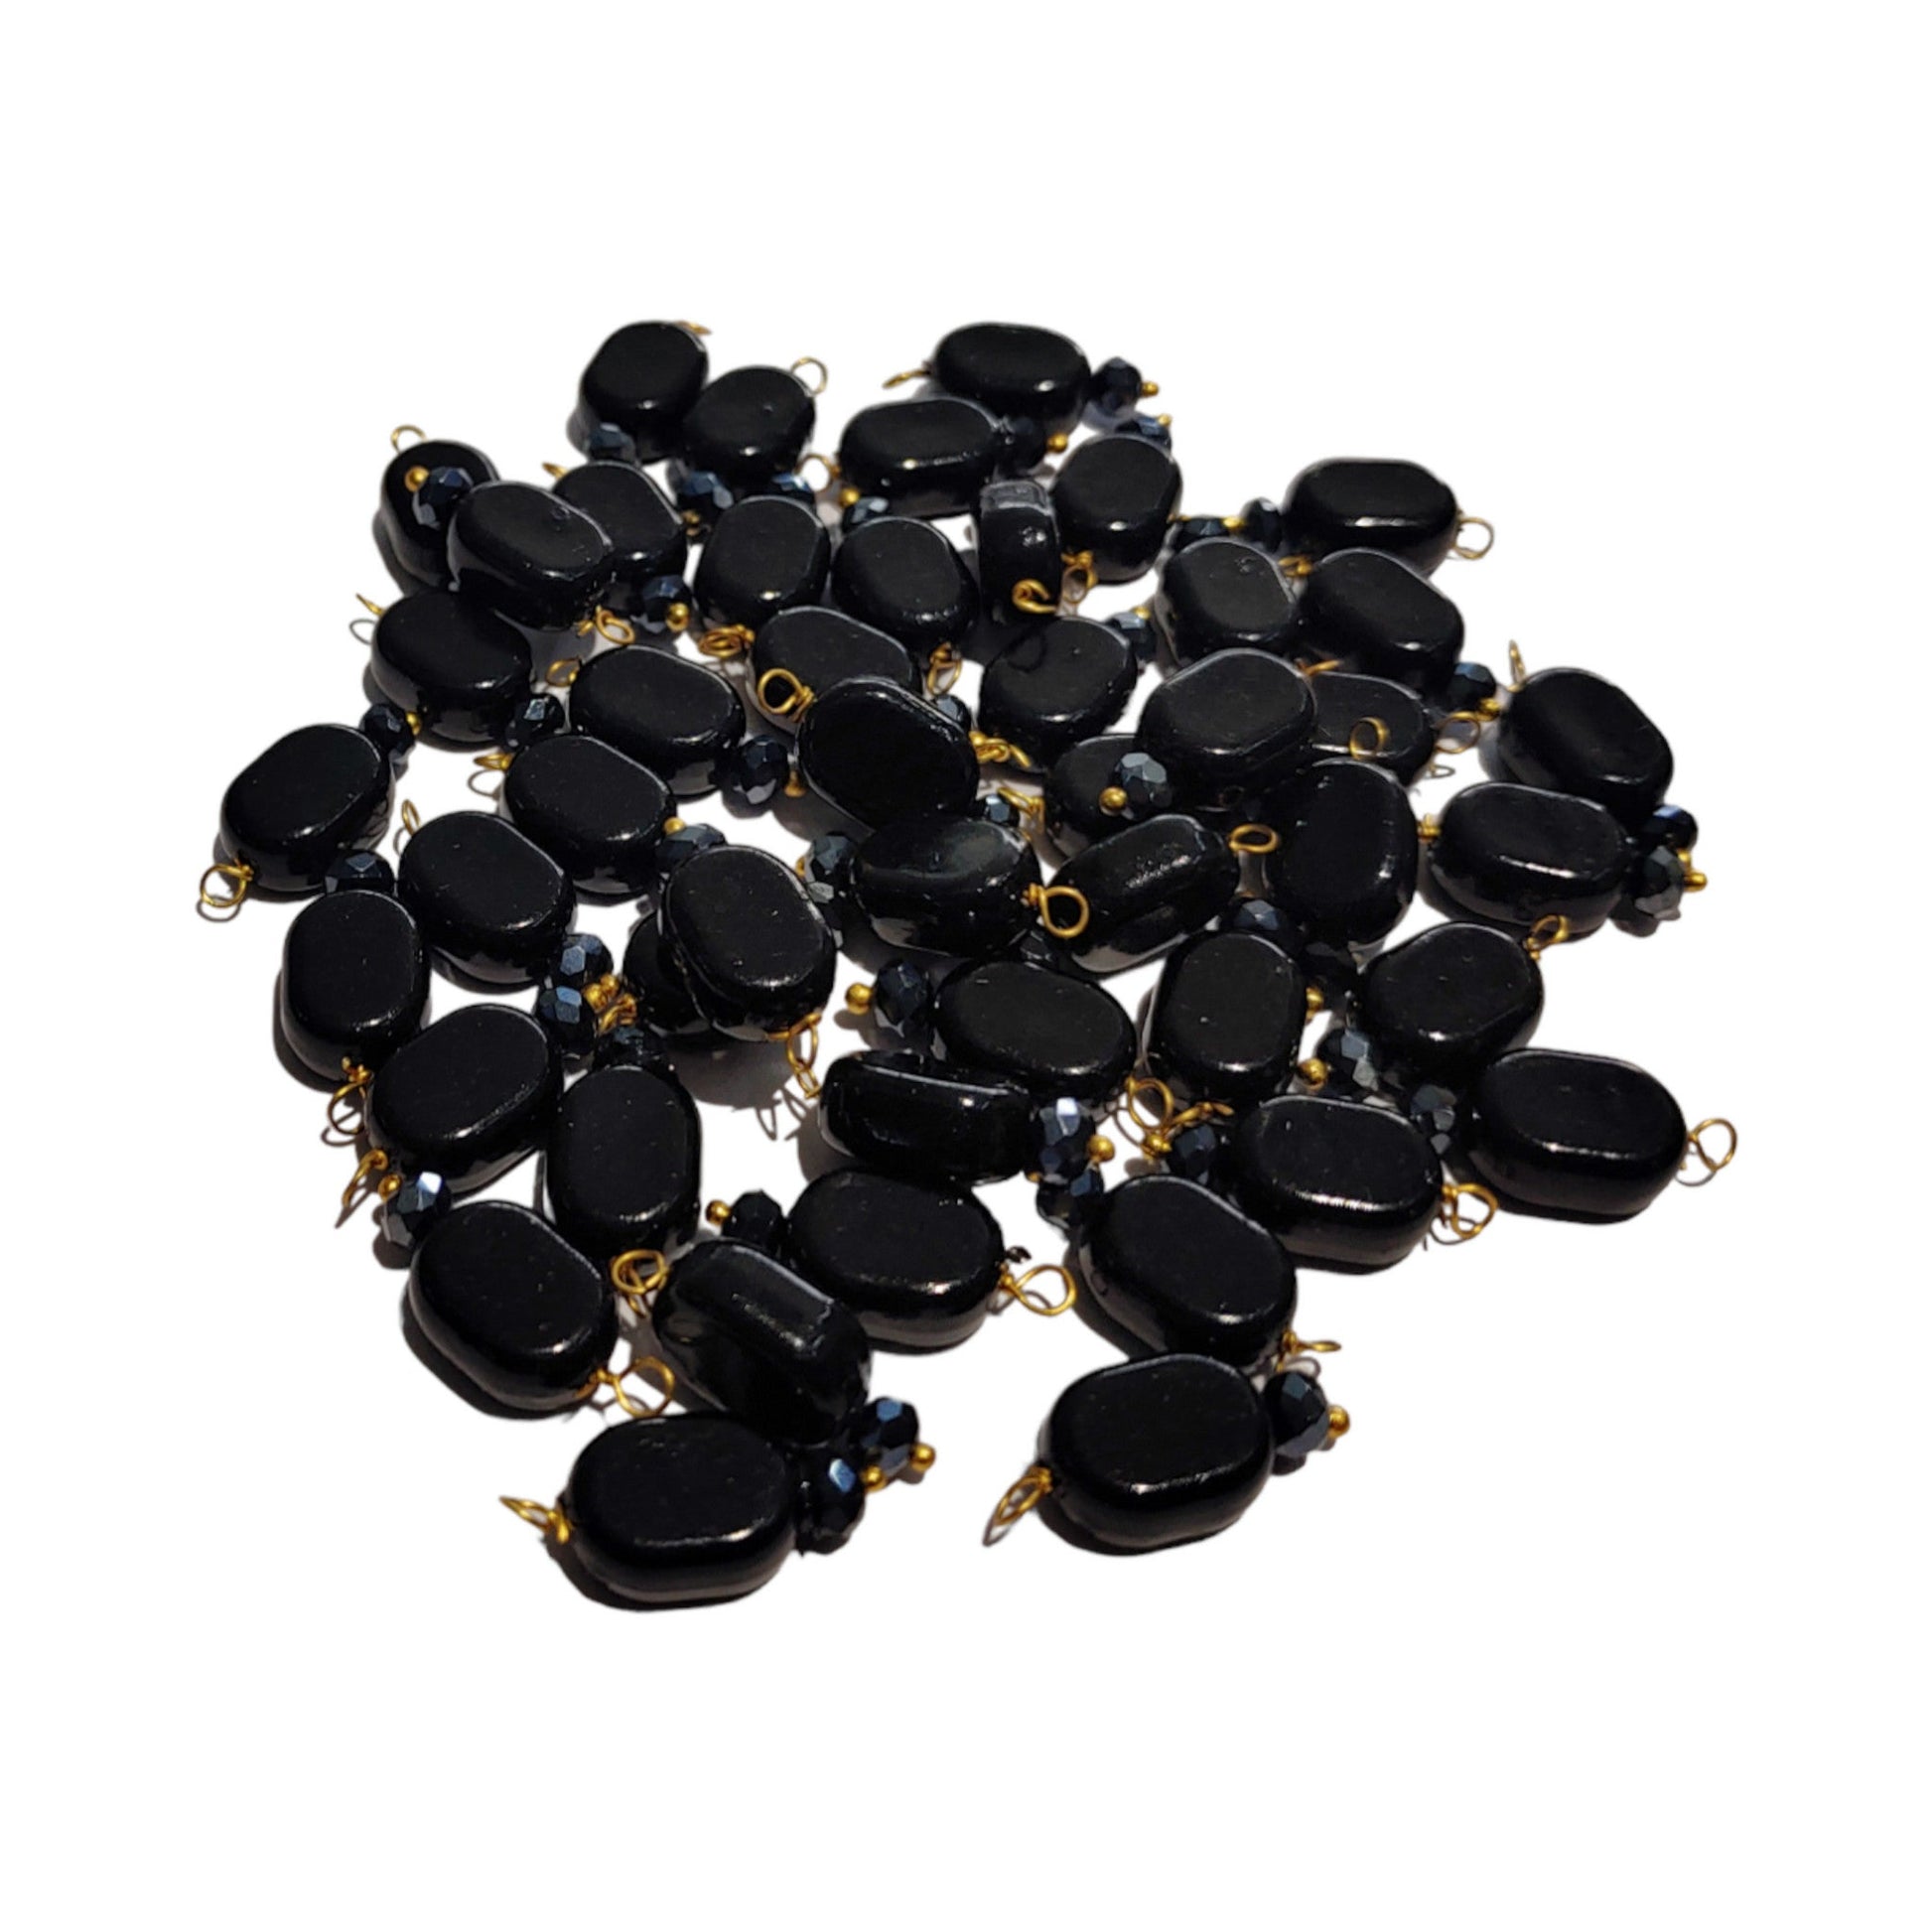 Indian Petals 100Pcs Colored Plastic Bead with Crystal Ball Drop for Craft Décor or Jewelry Making, 8x12mm, Black